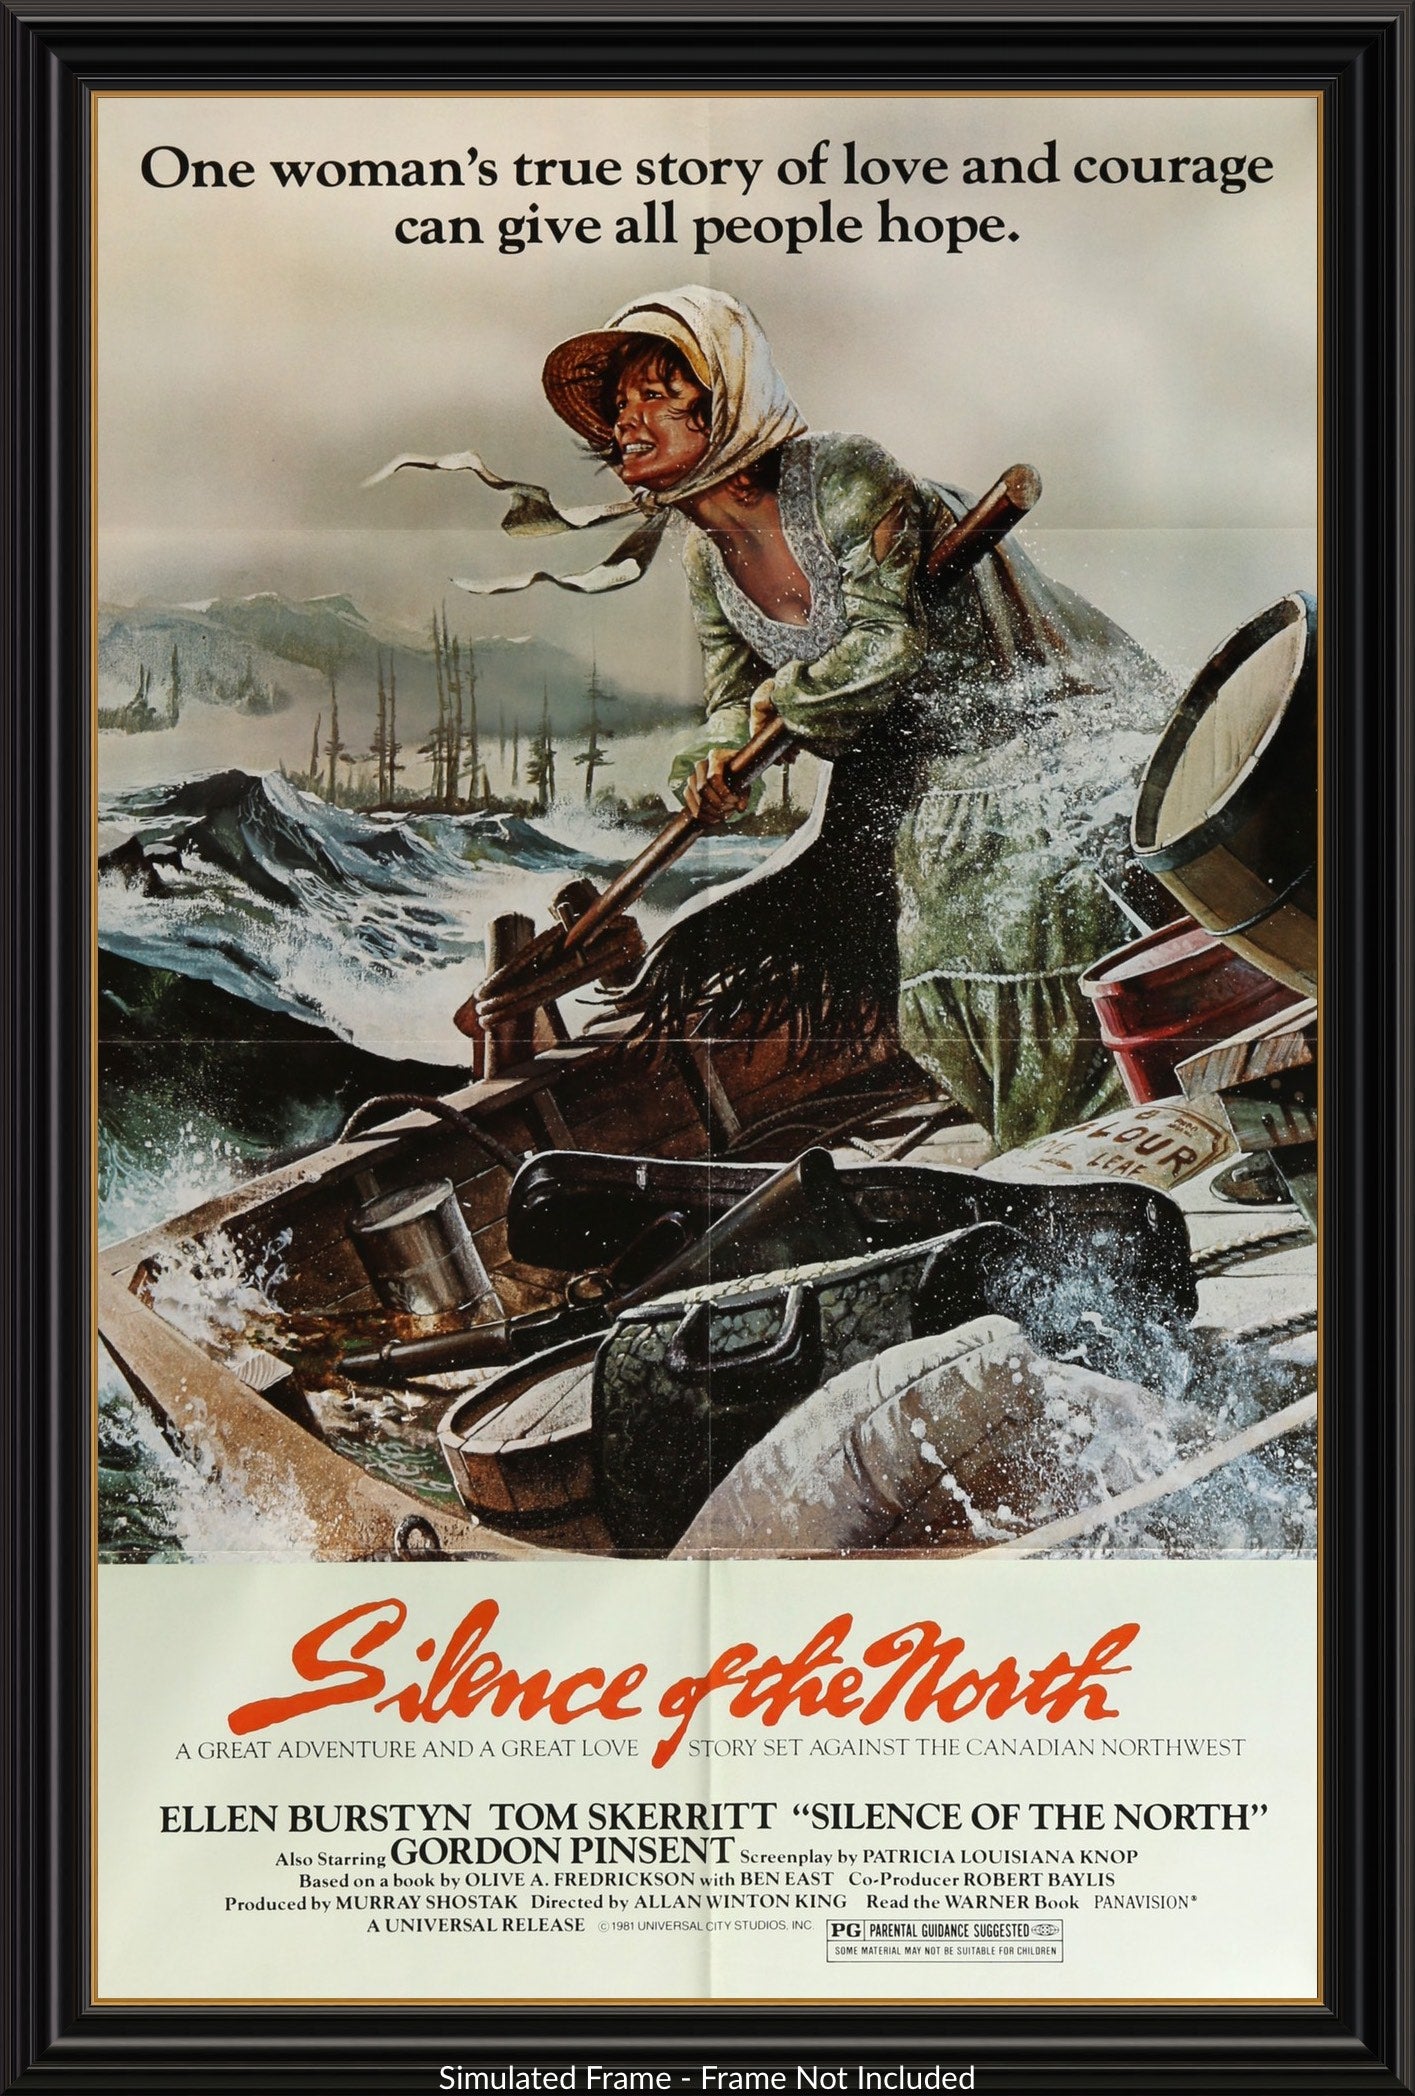 Silence of the North (1981) original movie poster for sale at Original Film Art